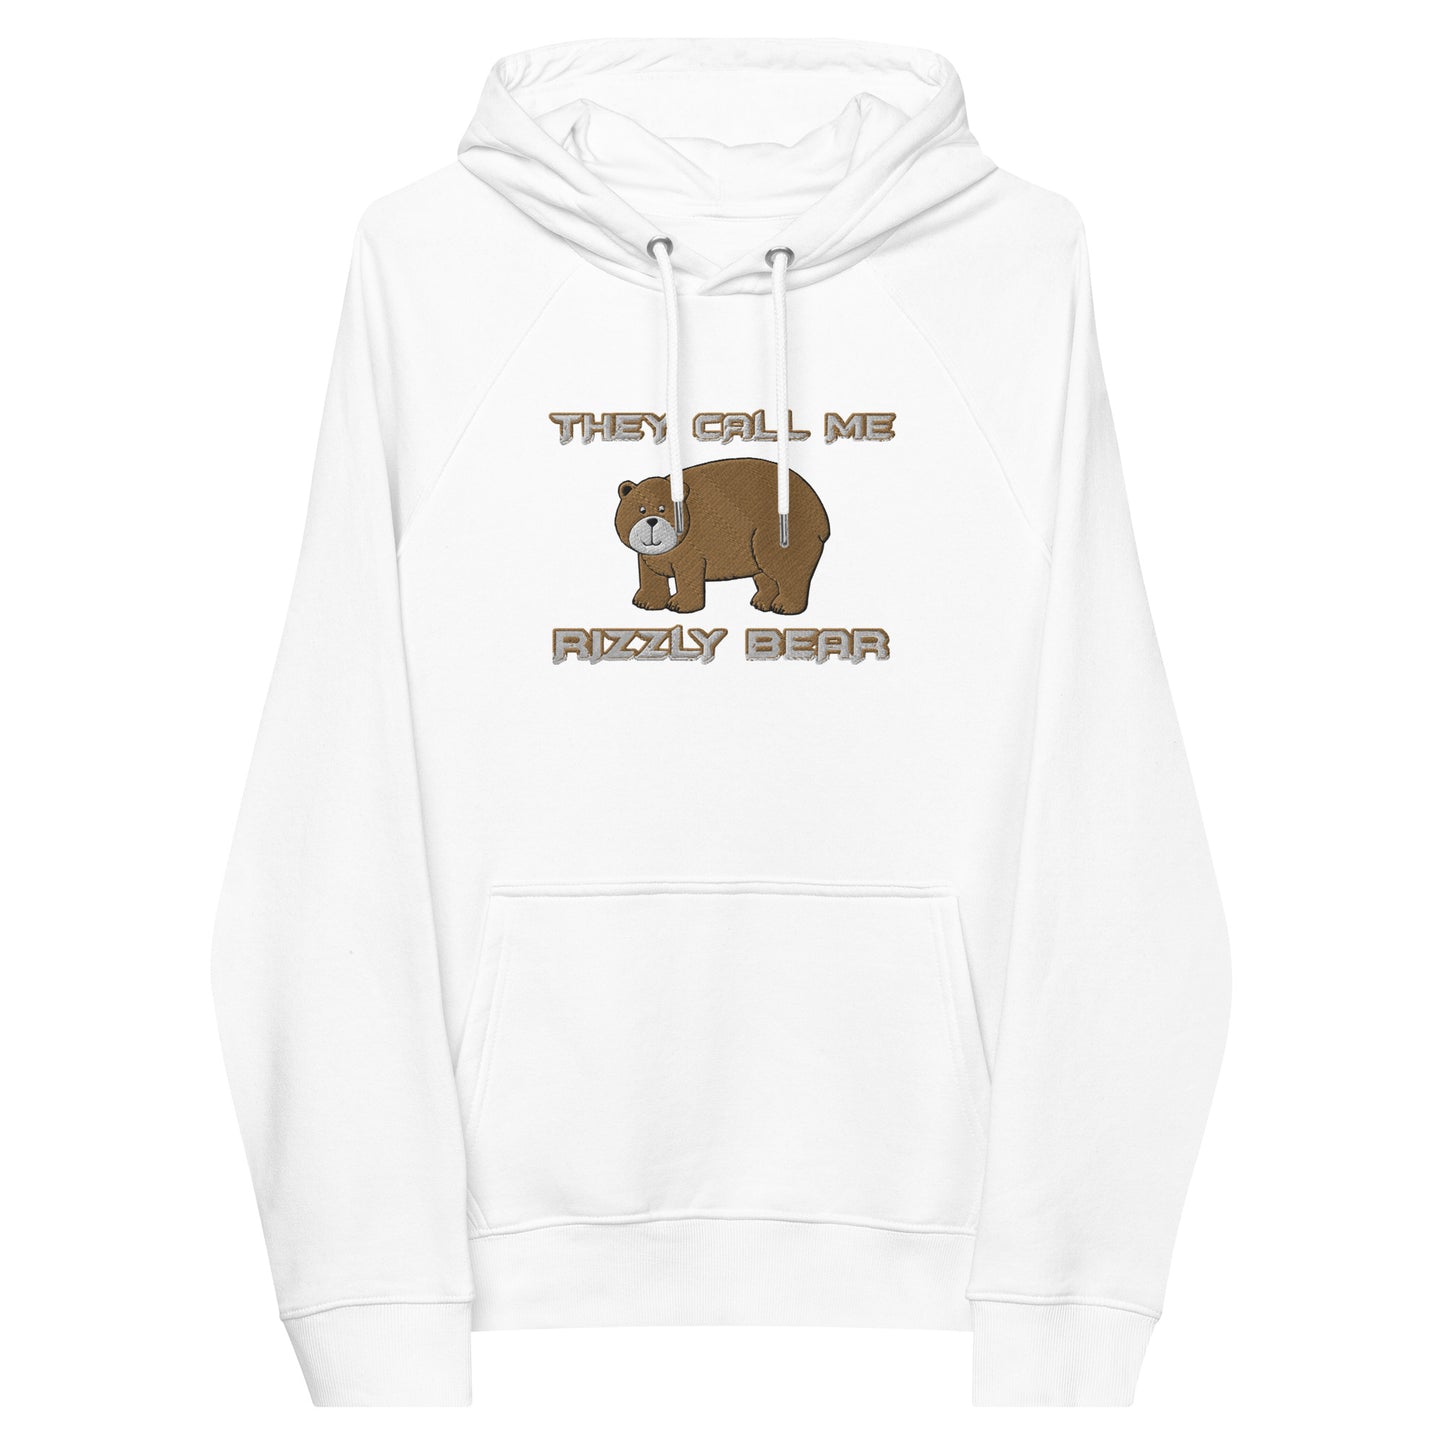 Rizzly Bear Unisex Hoodie